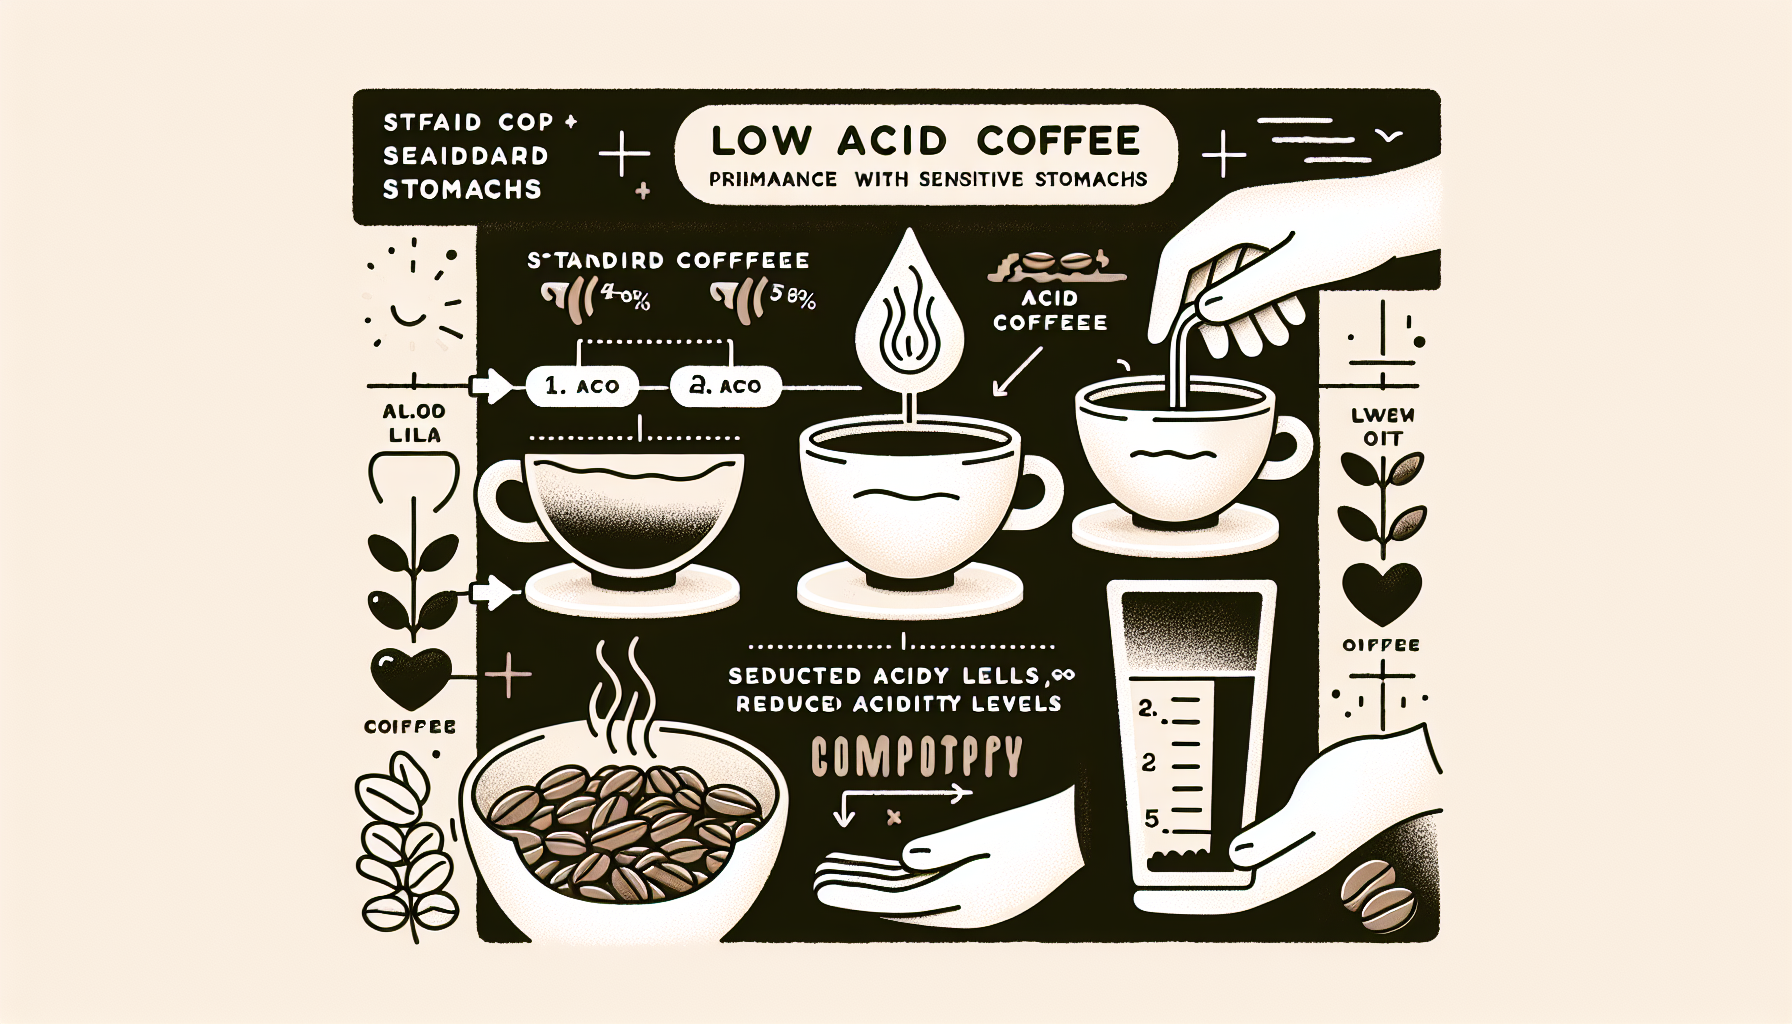 An informative image displaying the concept of low acid coffee, primarily designed for audience with sensitive stomachs. The image should contain a simplistic yet detailed overview of how low acid cof